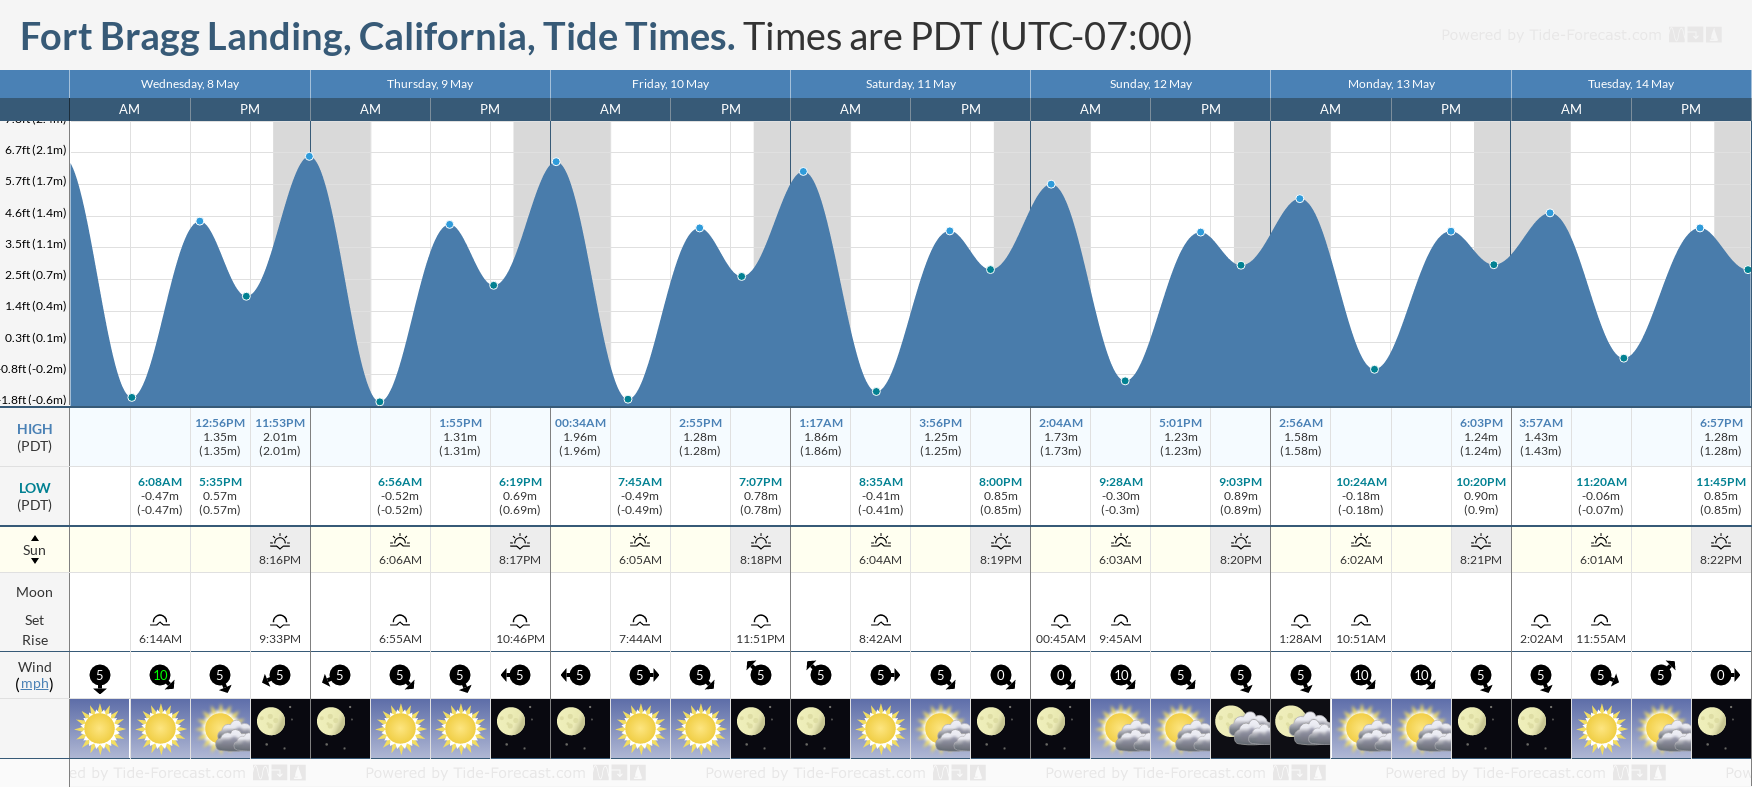 Fort Bragg Landing, California Tide Chart including high and low tide tide times for the next 7 days